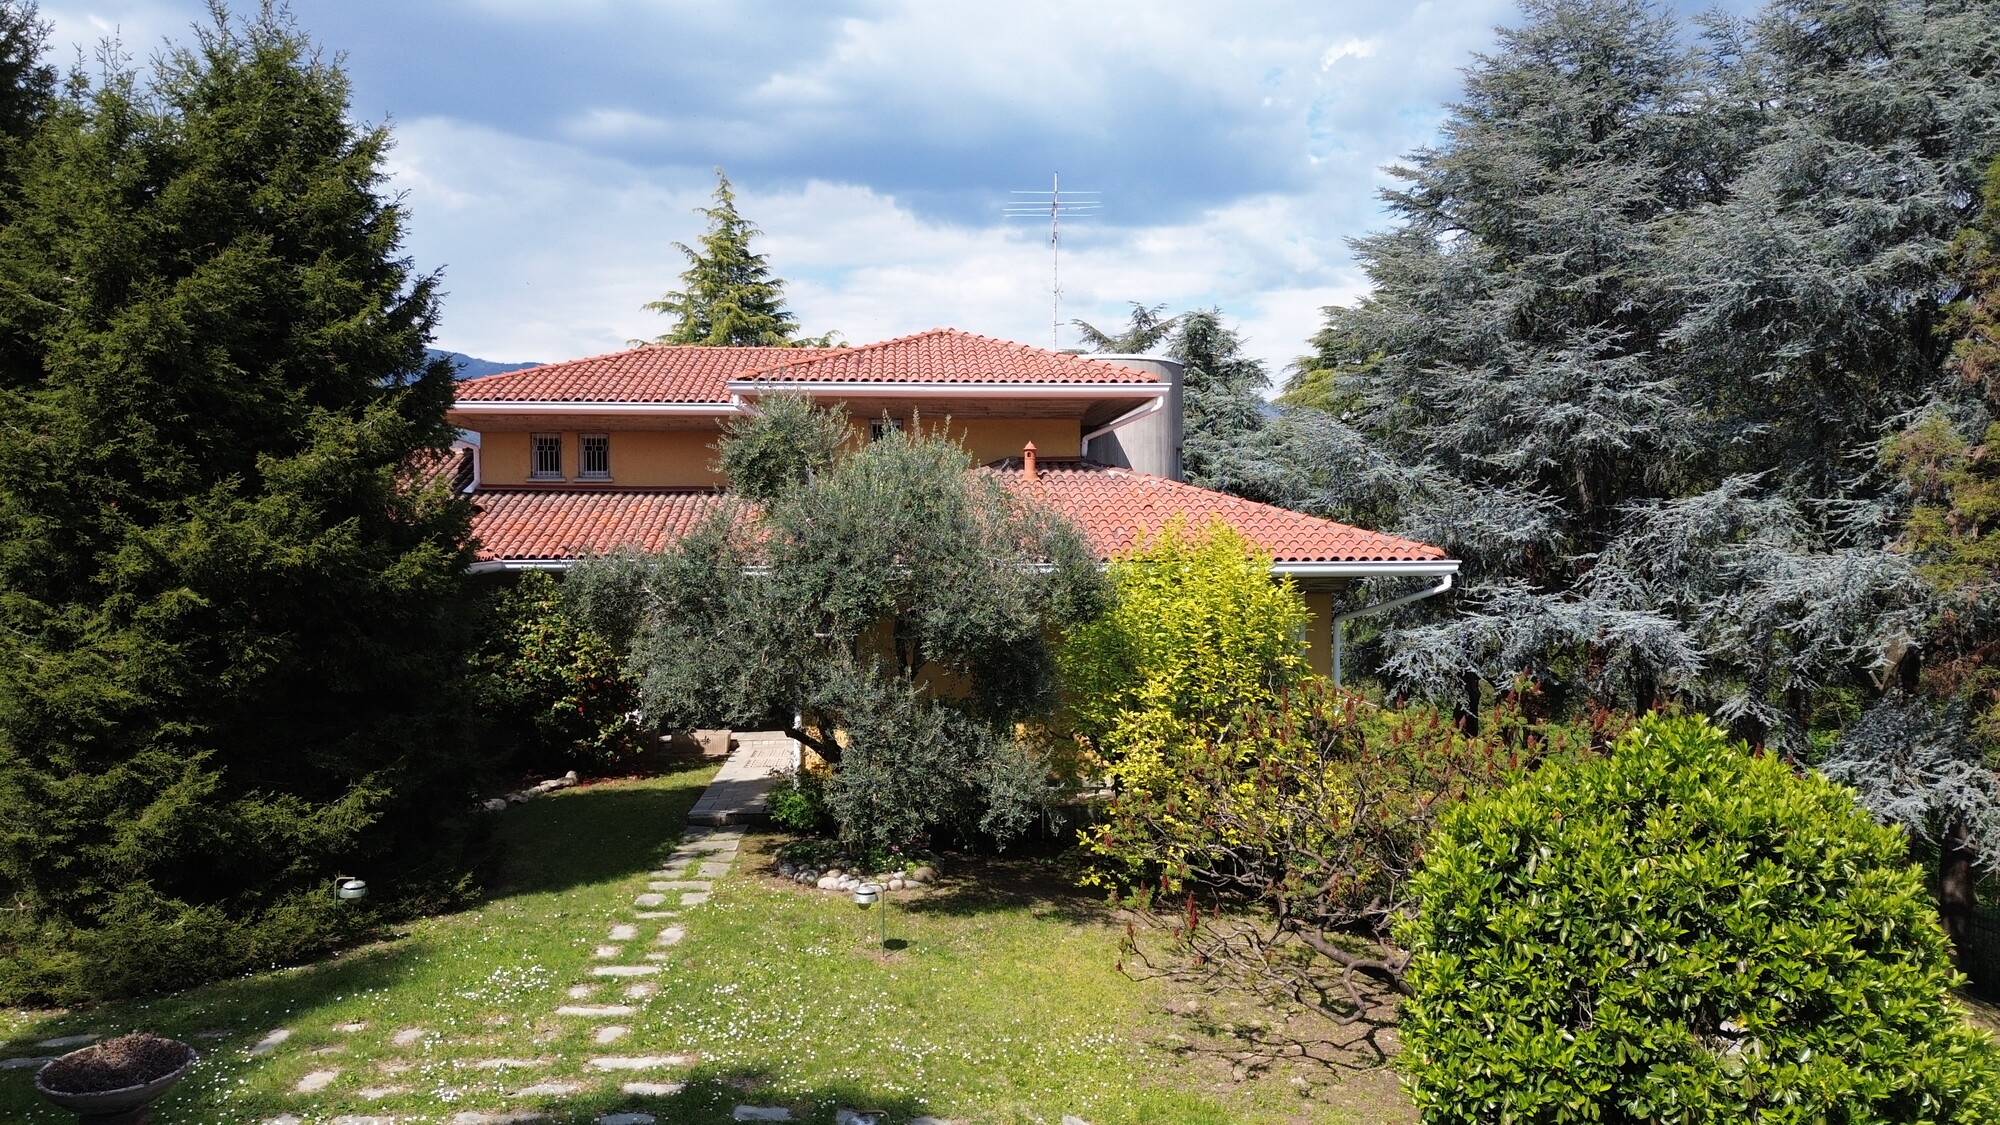 For sale villa by the lake Monguzzo Lombardia